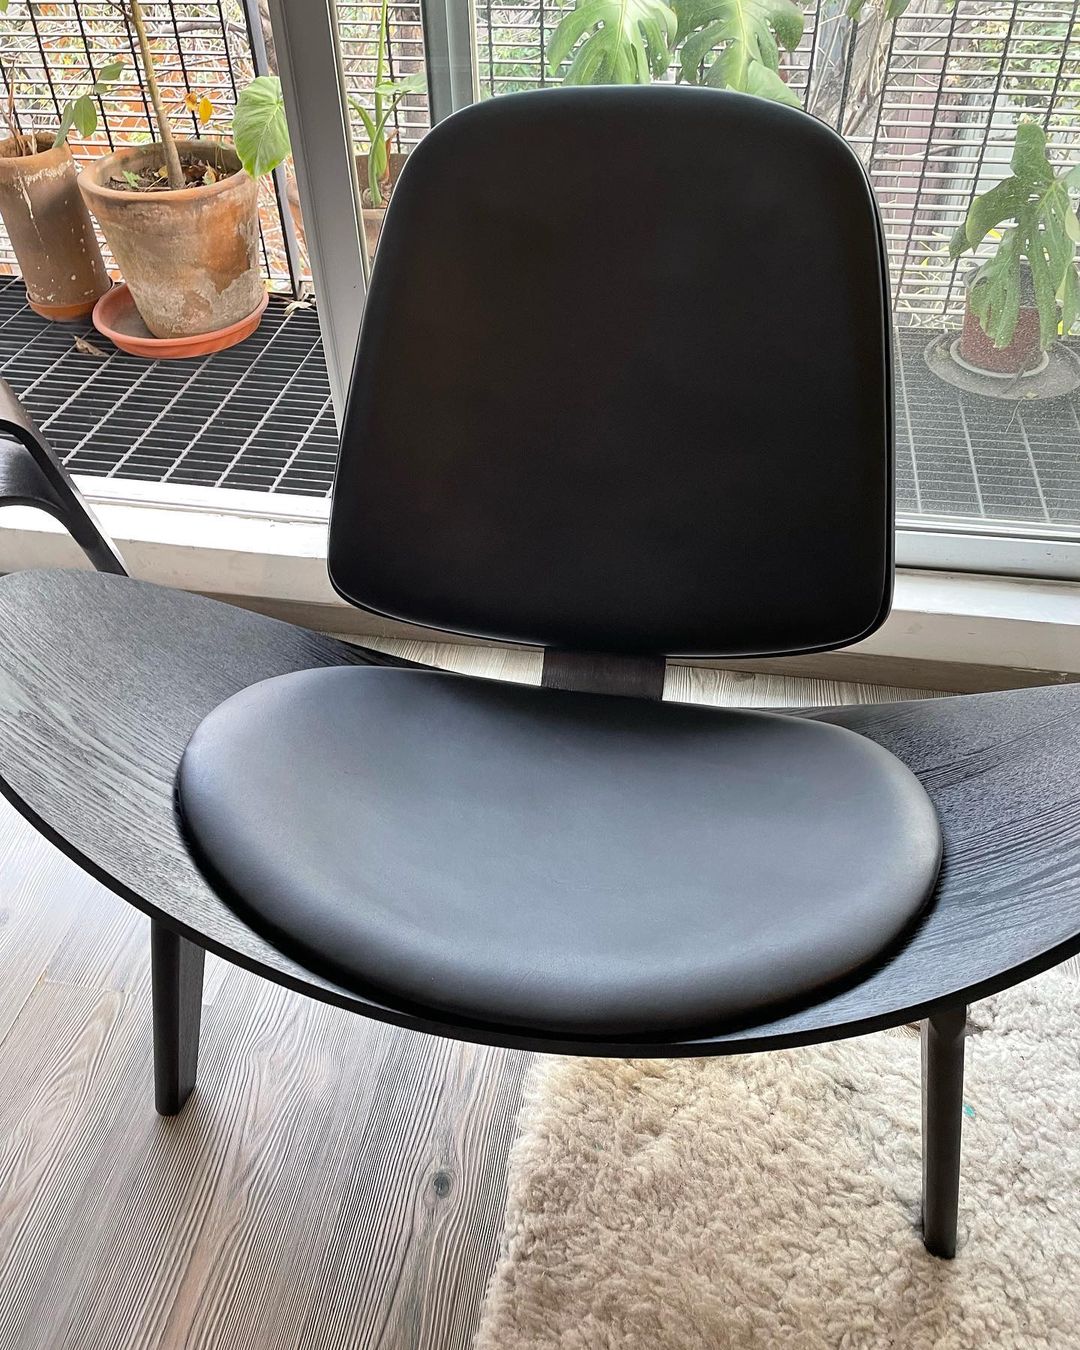 Shell Chair CH07 - Hans Wagner